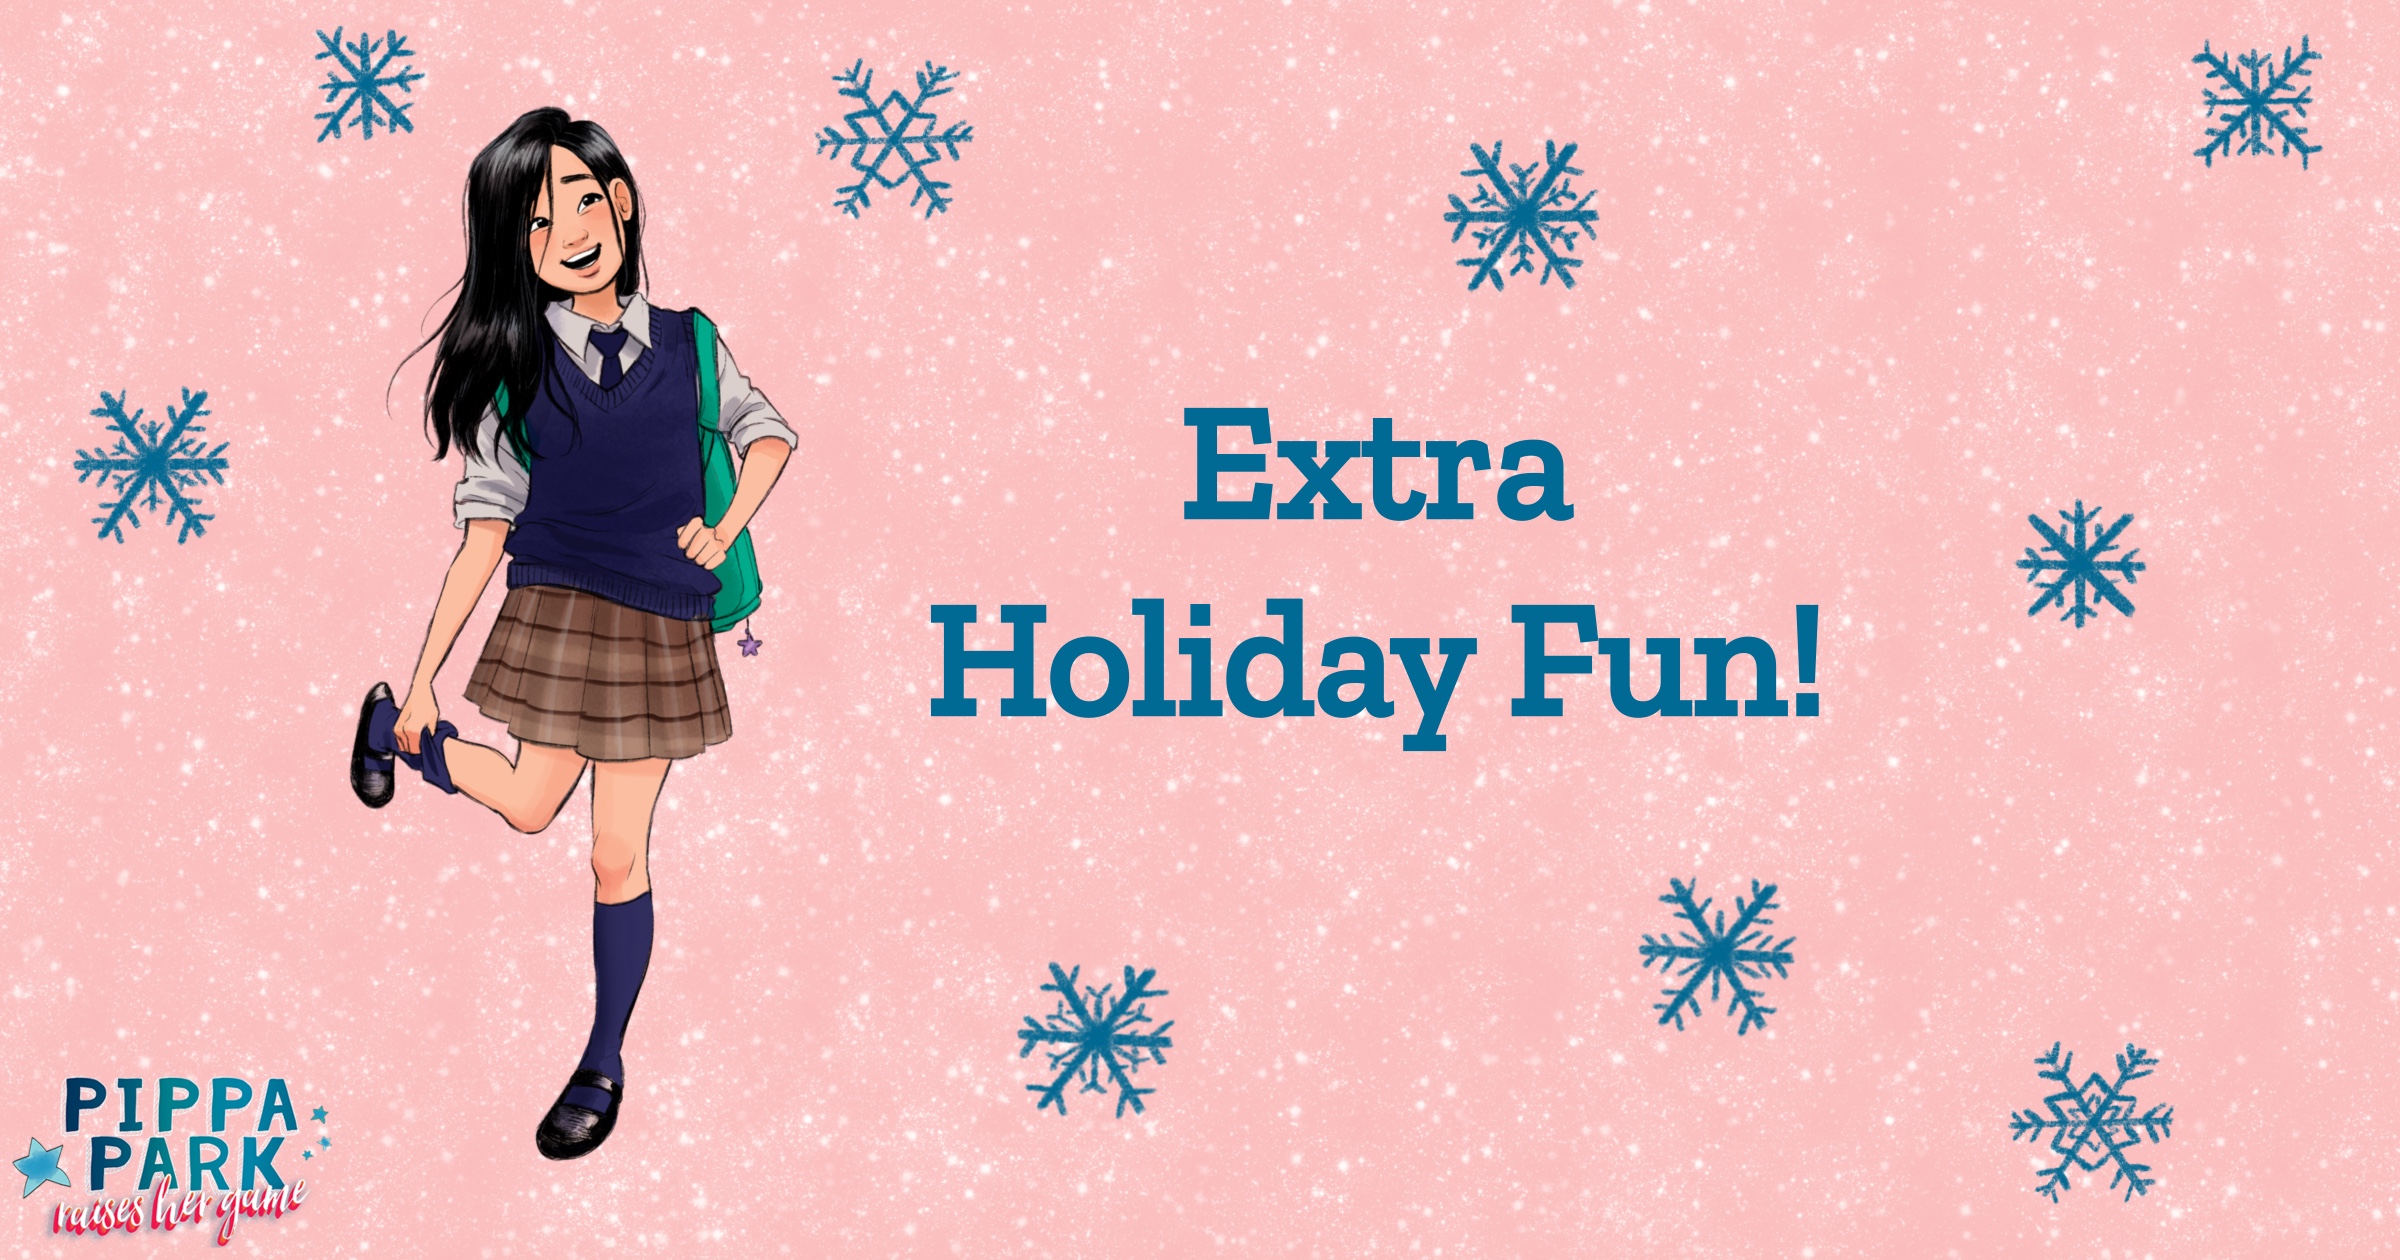 Pippa Park, a girl, is in her school uniform and is holding her right foot in her hand while wearing her backpack. To the right of her reads â€œExtra Holiday Fun!â€ in the same color as the decorative snowflakes surrounding the light pink graphic. 